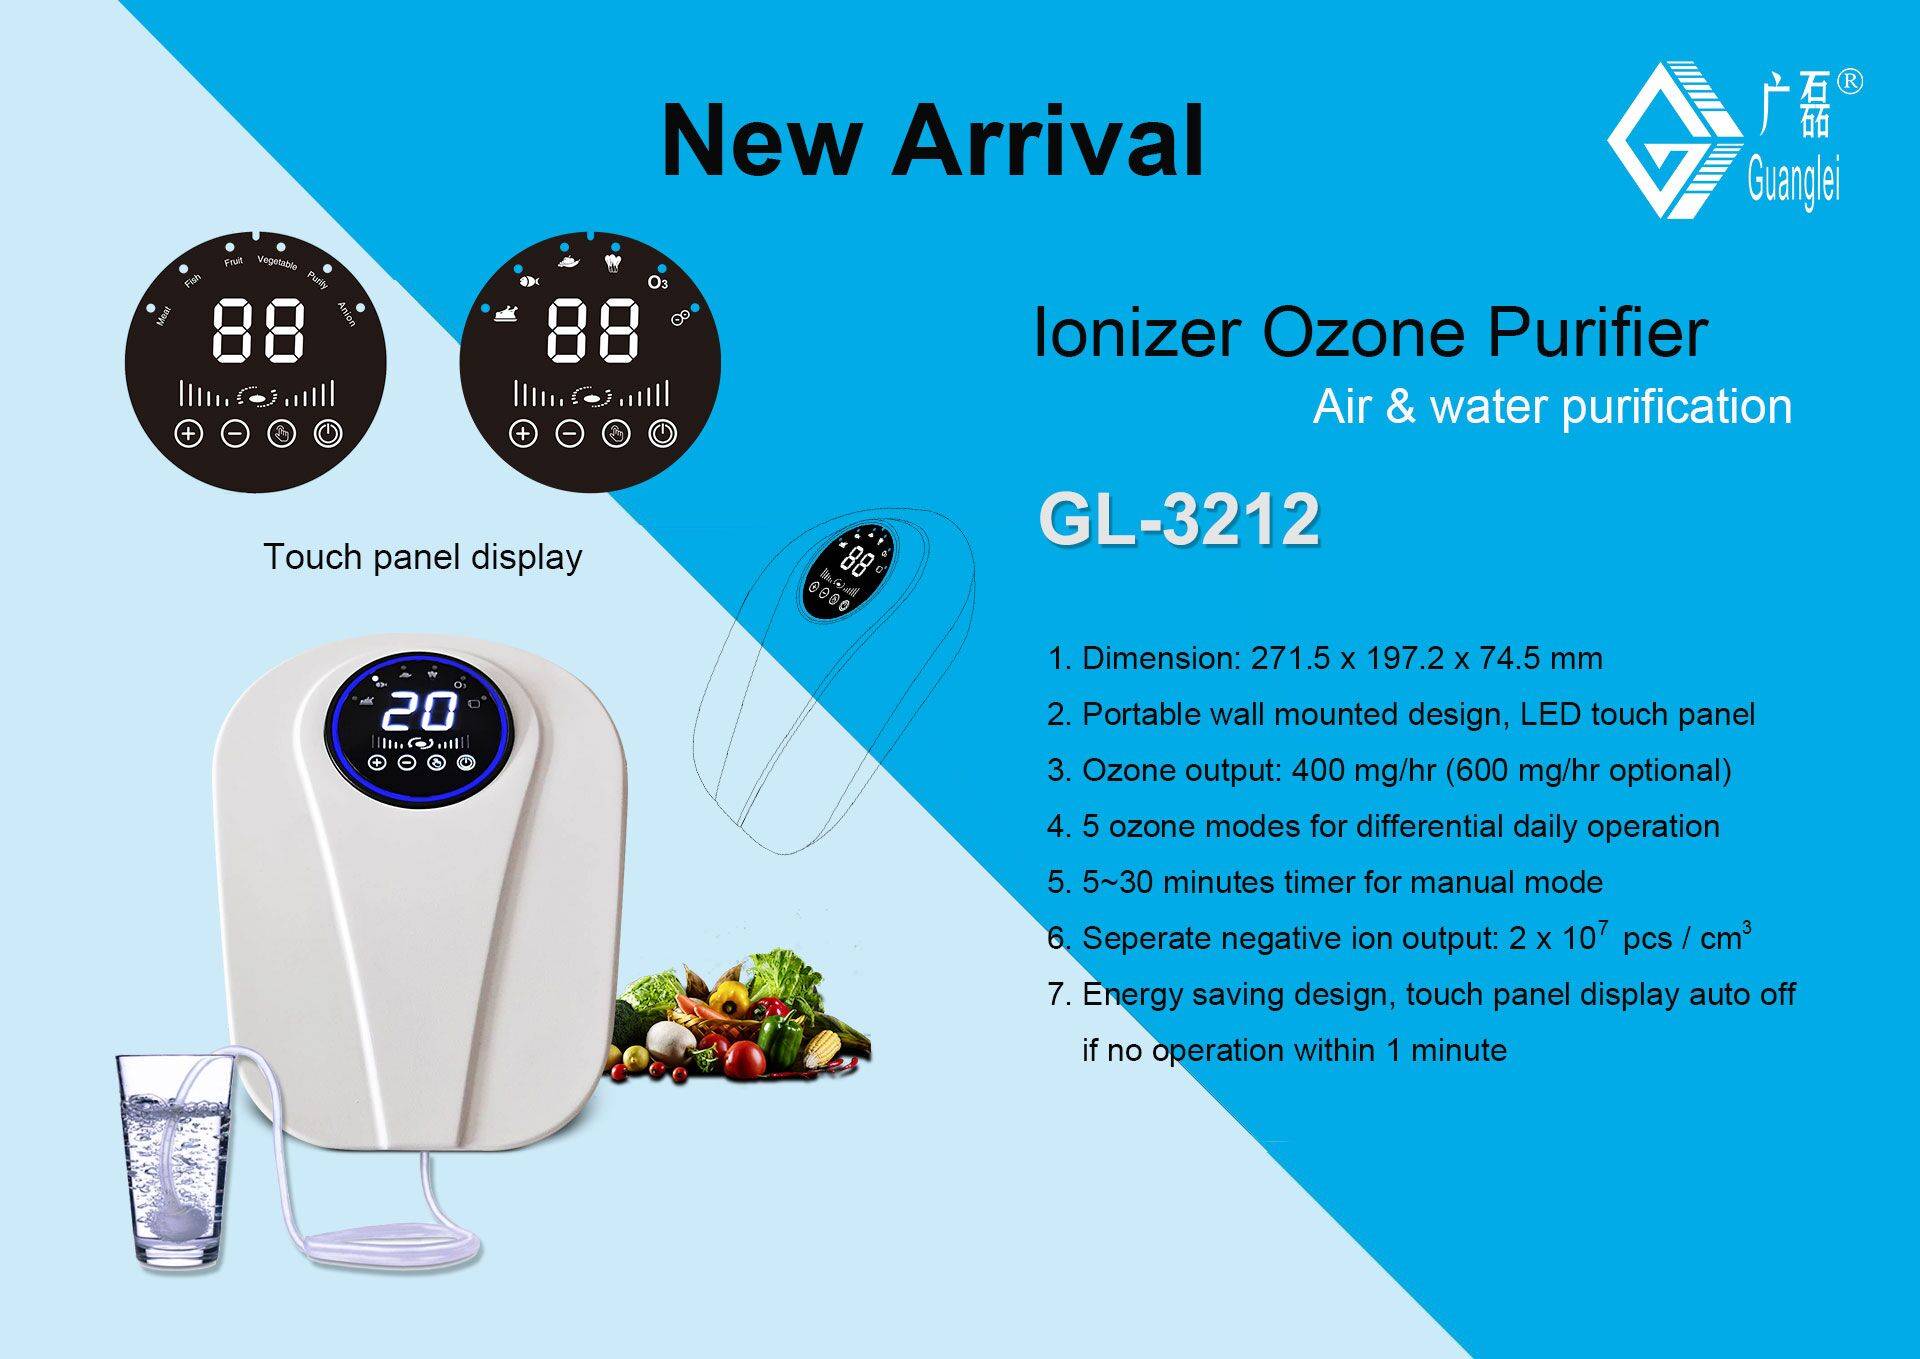 New Ionic Ozone Air and Water Purifier Launch